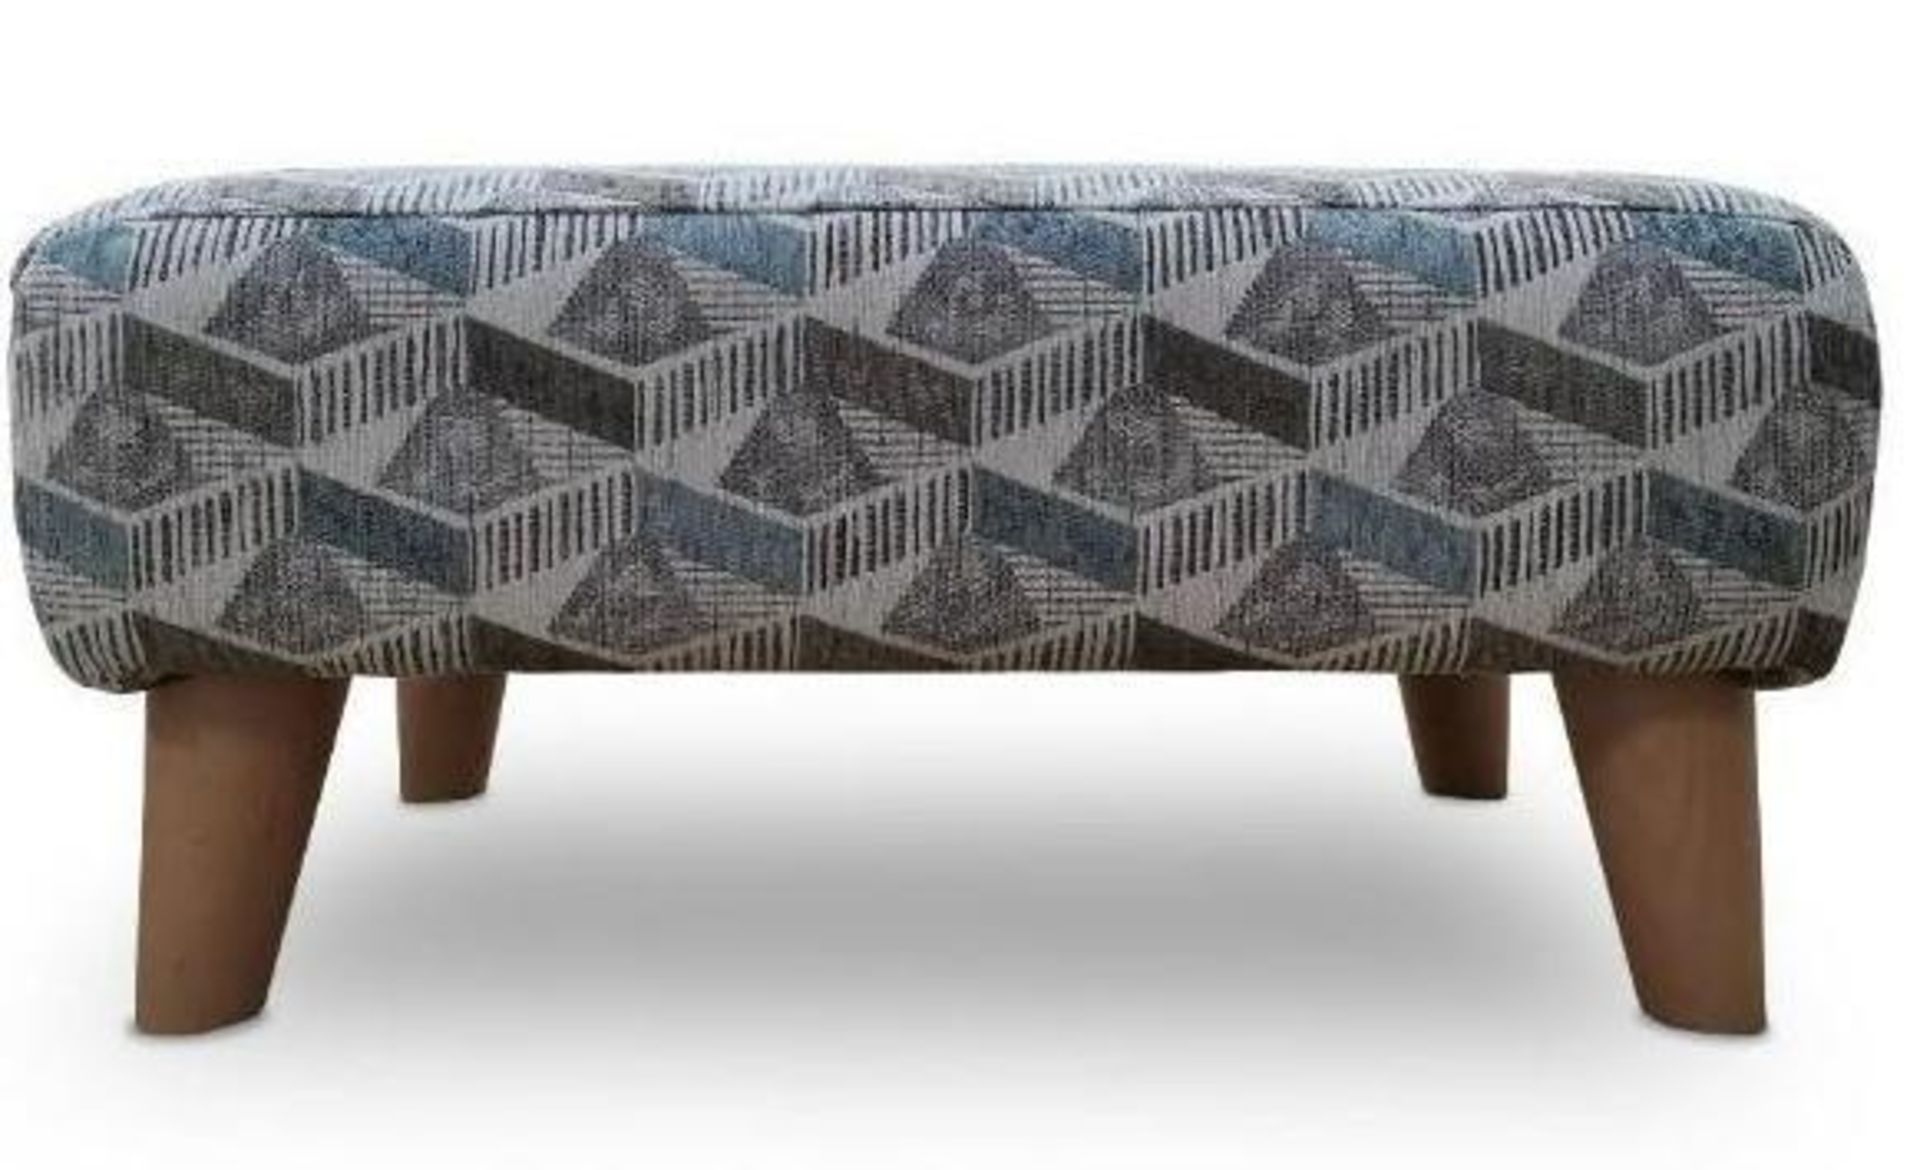 BRAND NEW Darcy footstool. RRP: £199